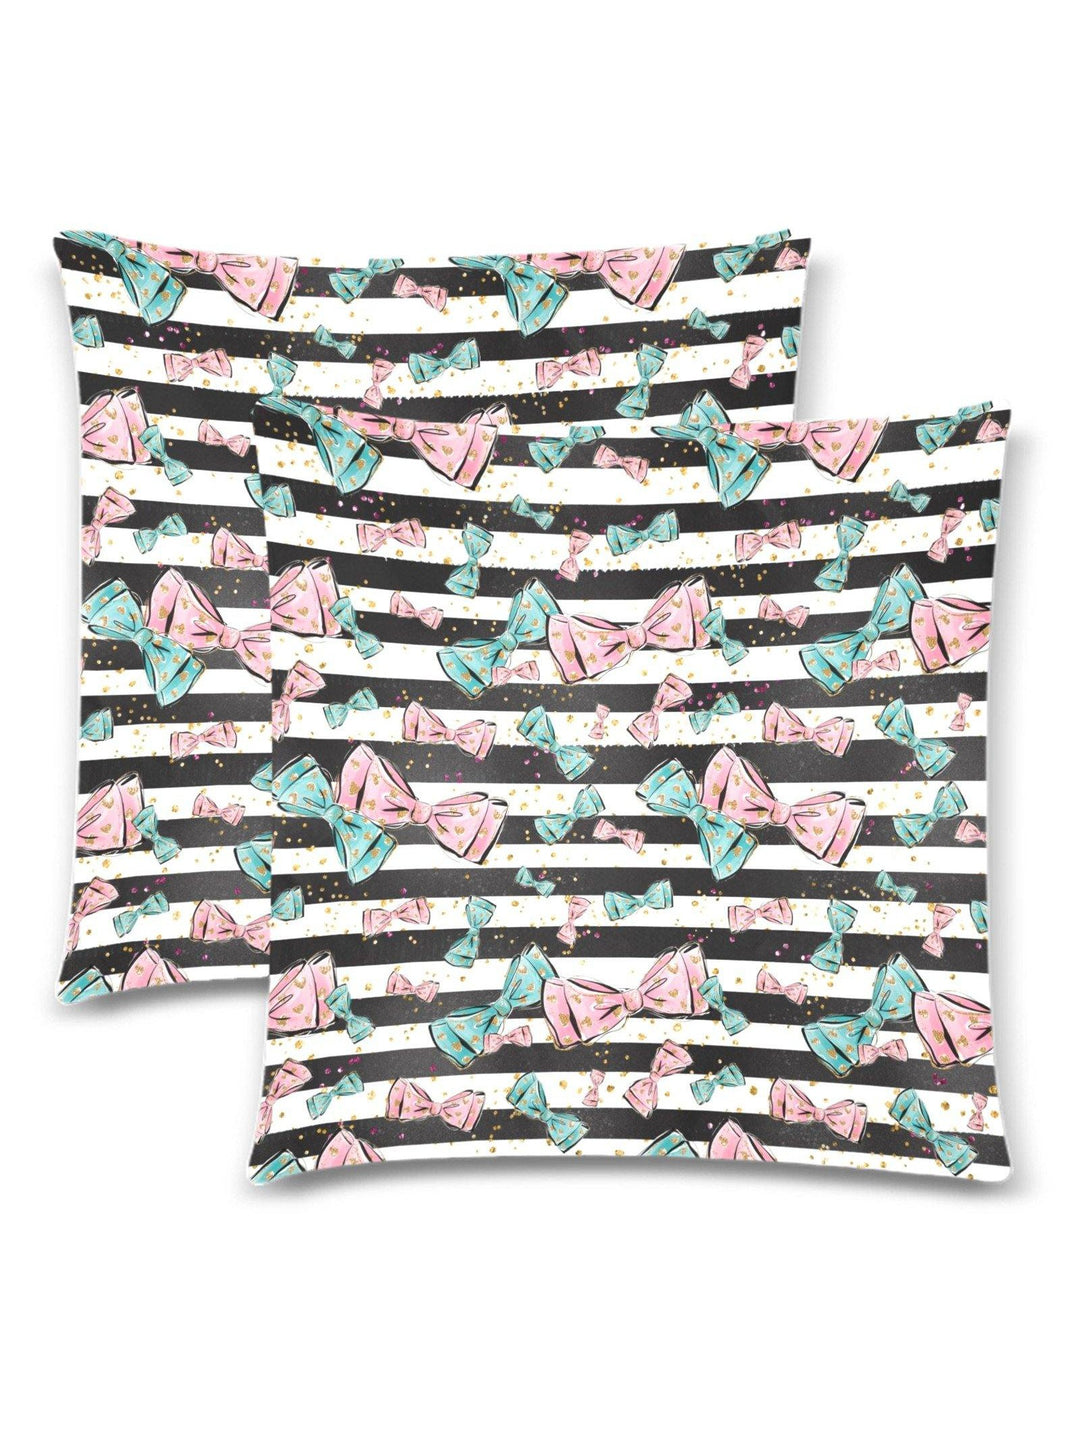 Bows Throw Pillow Cover 18"x 18" (Twin Sides) (Set of 2)